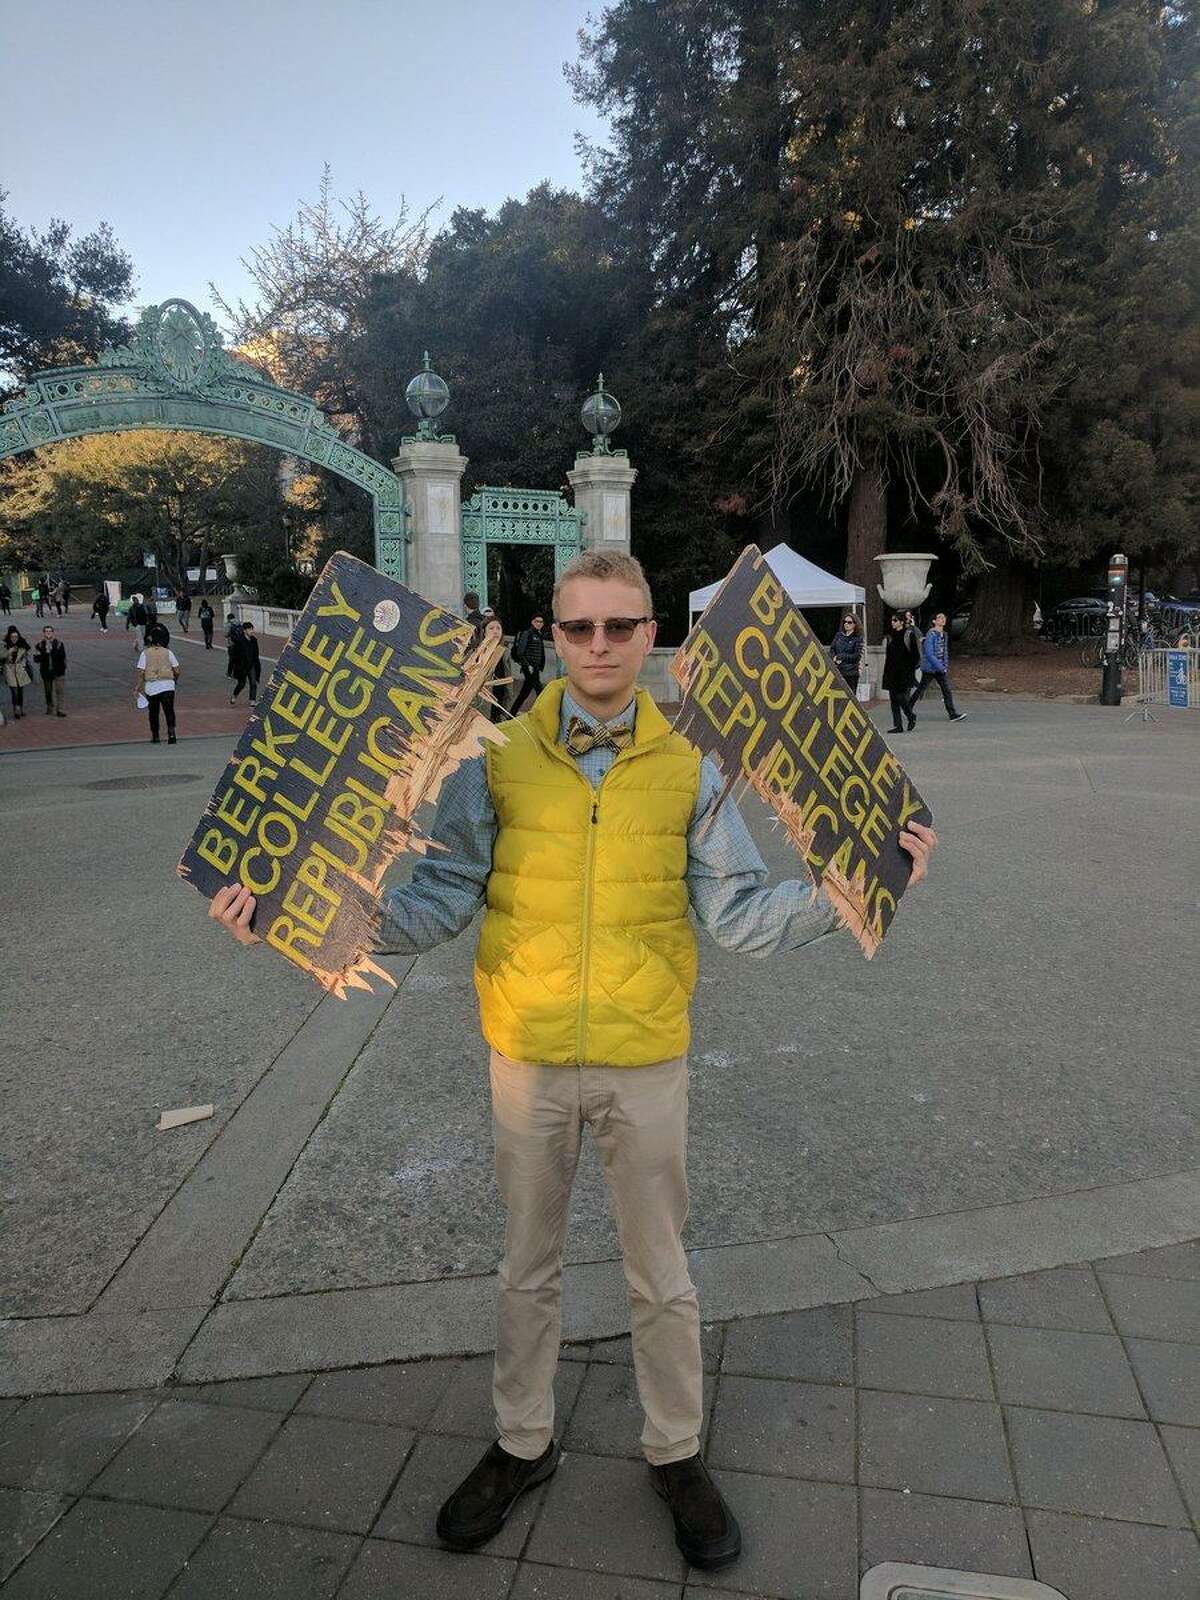 Troy Worden, a member of the Berkeley College Republicans and third year student, displays one of the group’s signs that was destroyed on campus Tuesday evening.